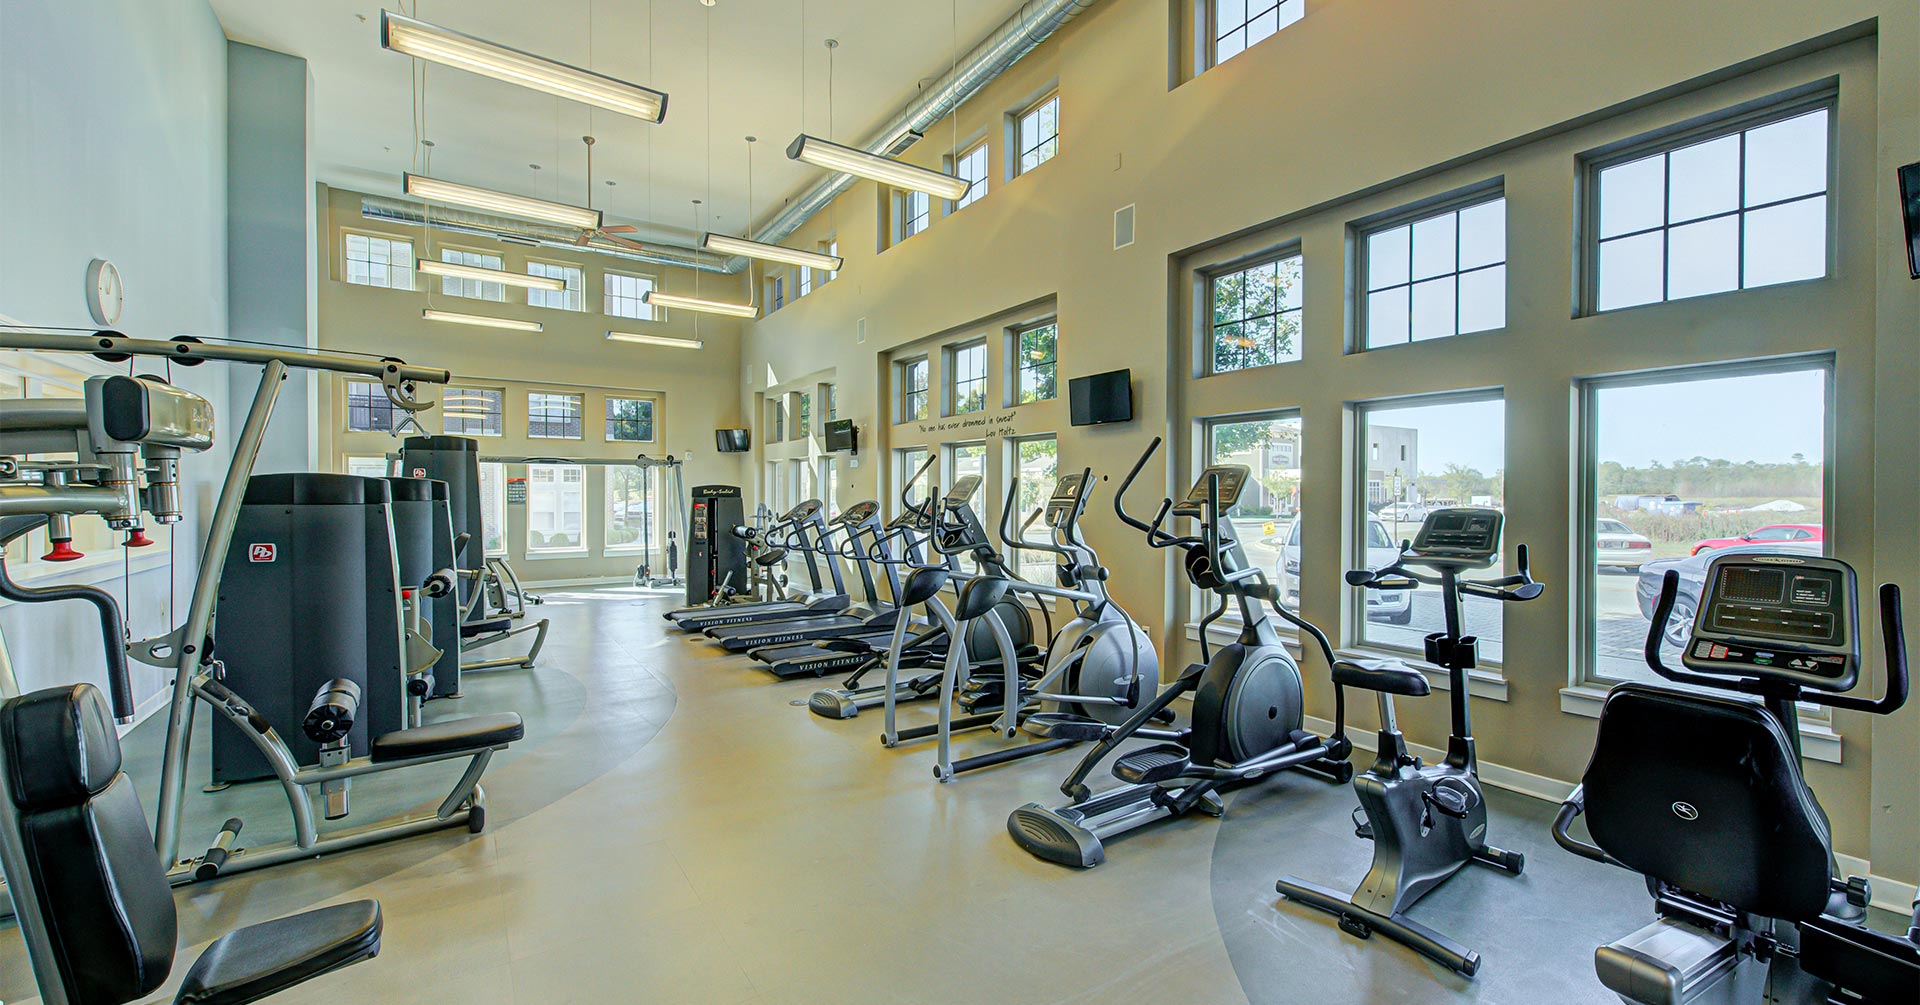 The Legacy Fitness Center